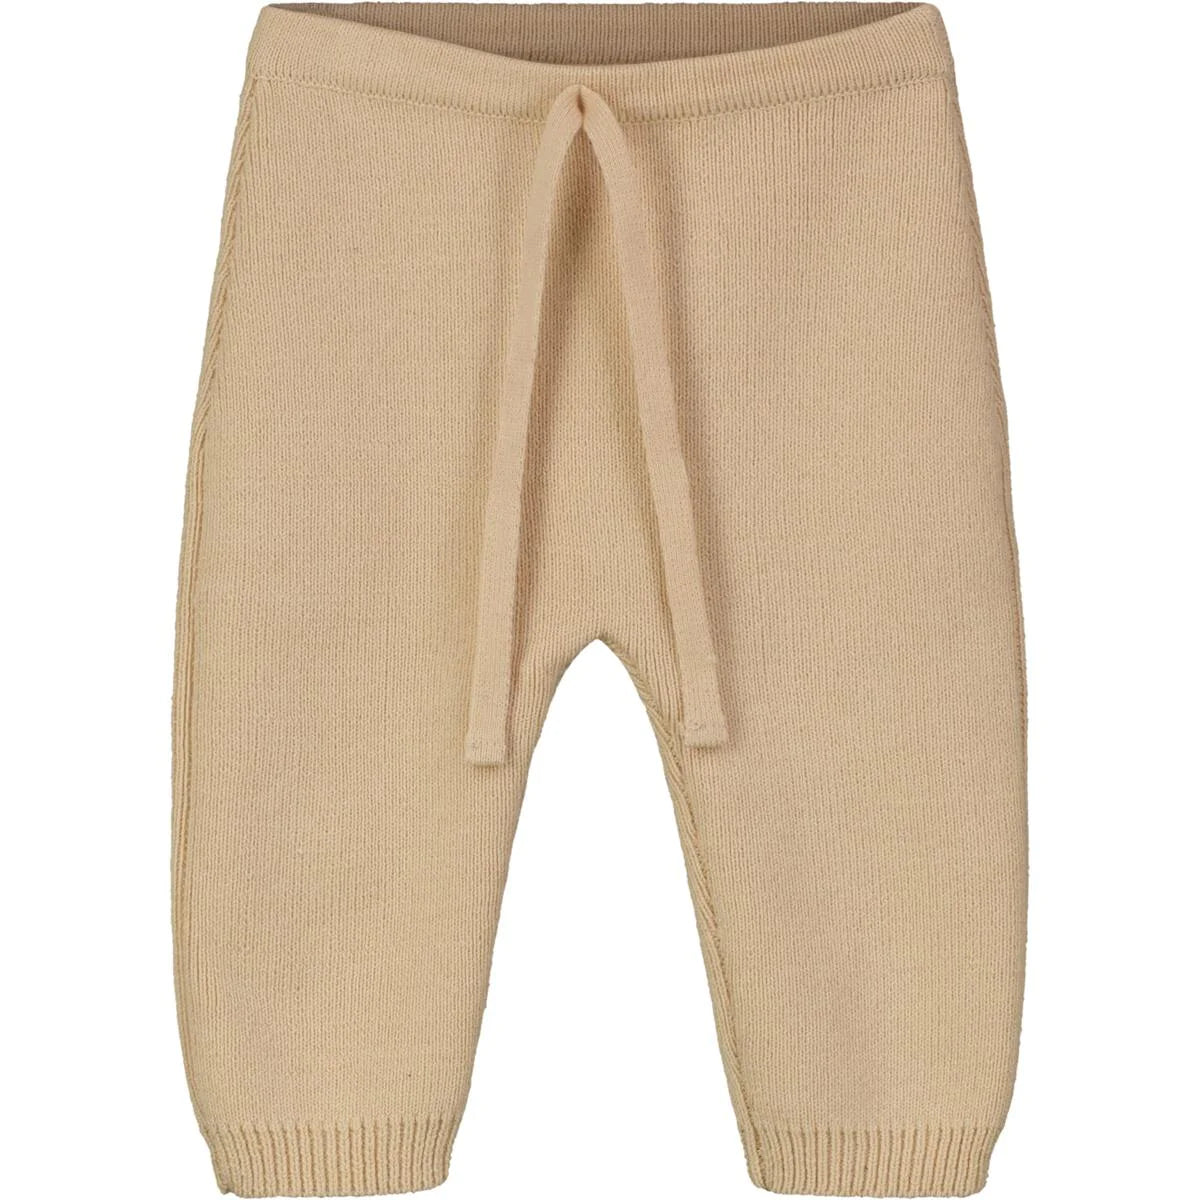 Ives Pants in Oatmeal